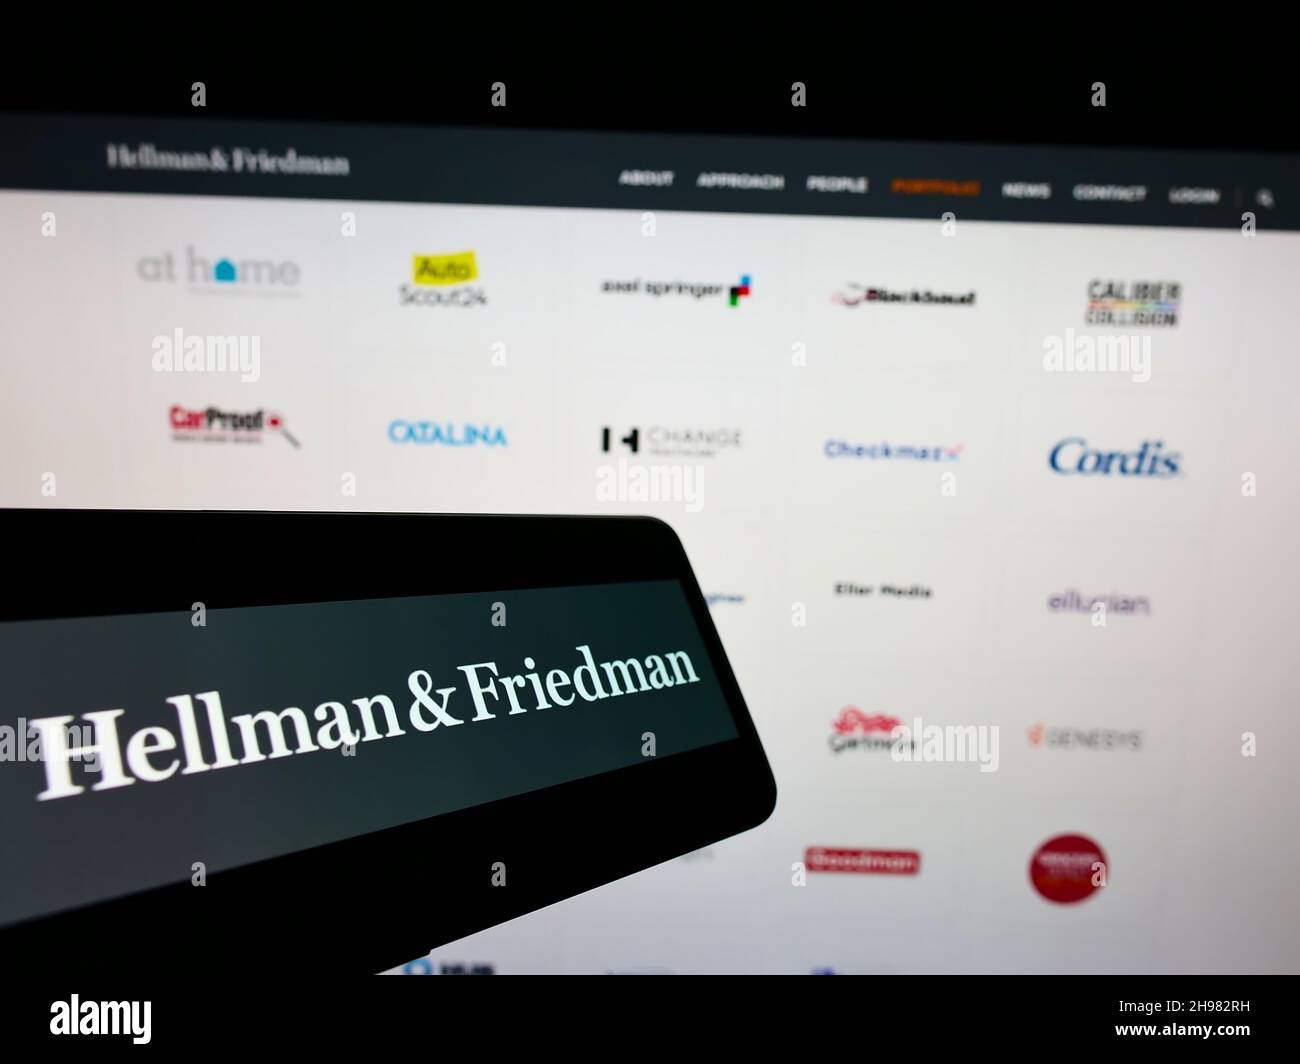 Cellphone with logo of US private equity company Hellman and Friedman LLC on screen in front of website. Focus on center-right of phone display. Stock Photo